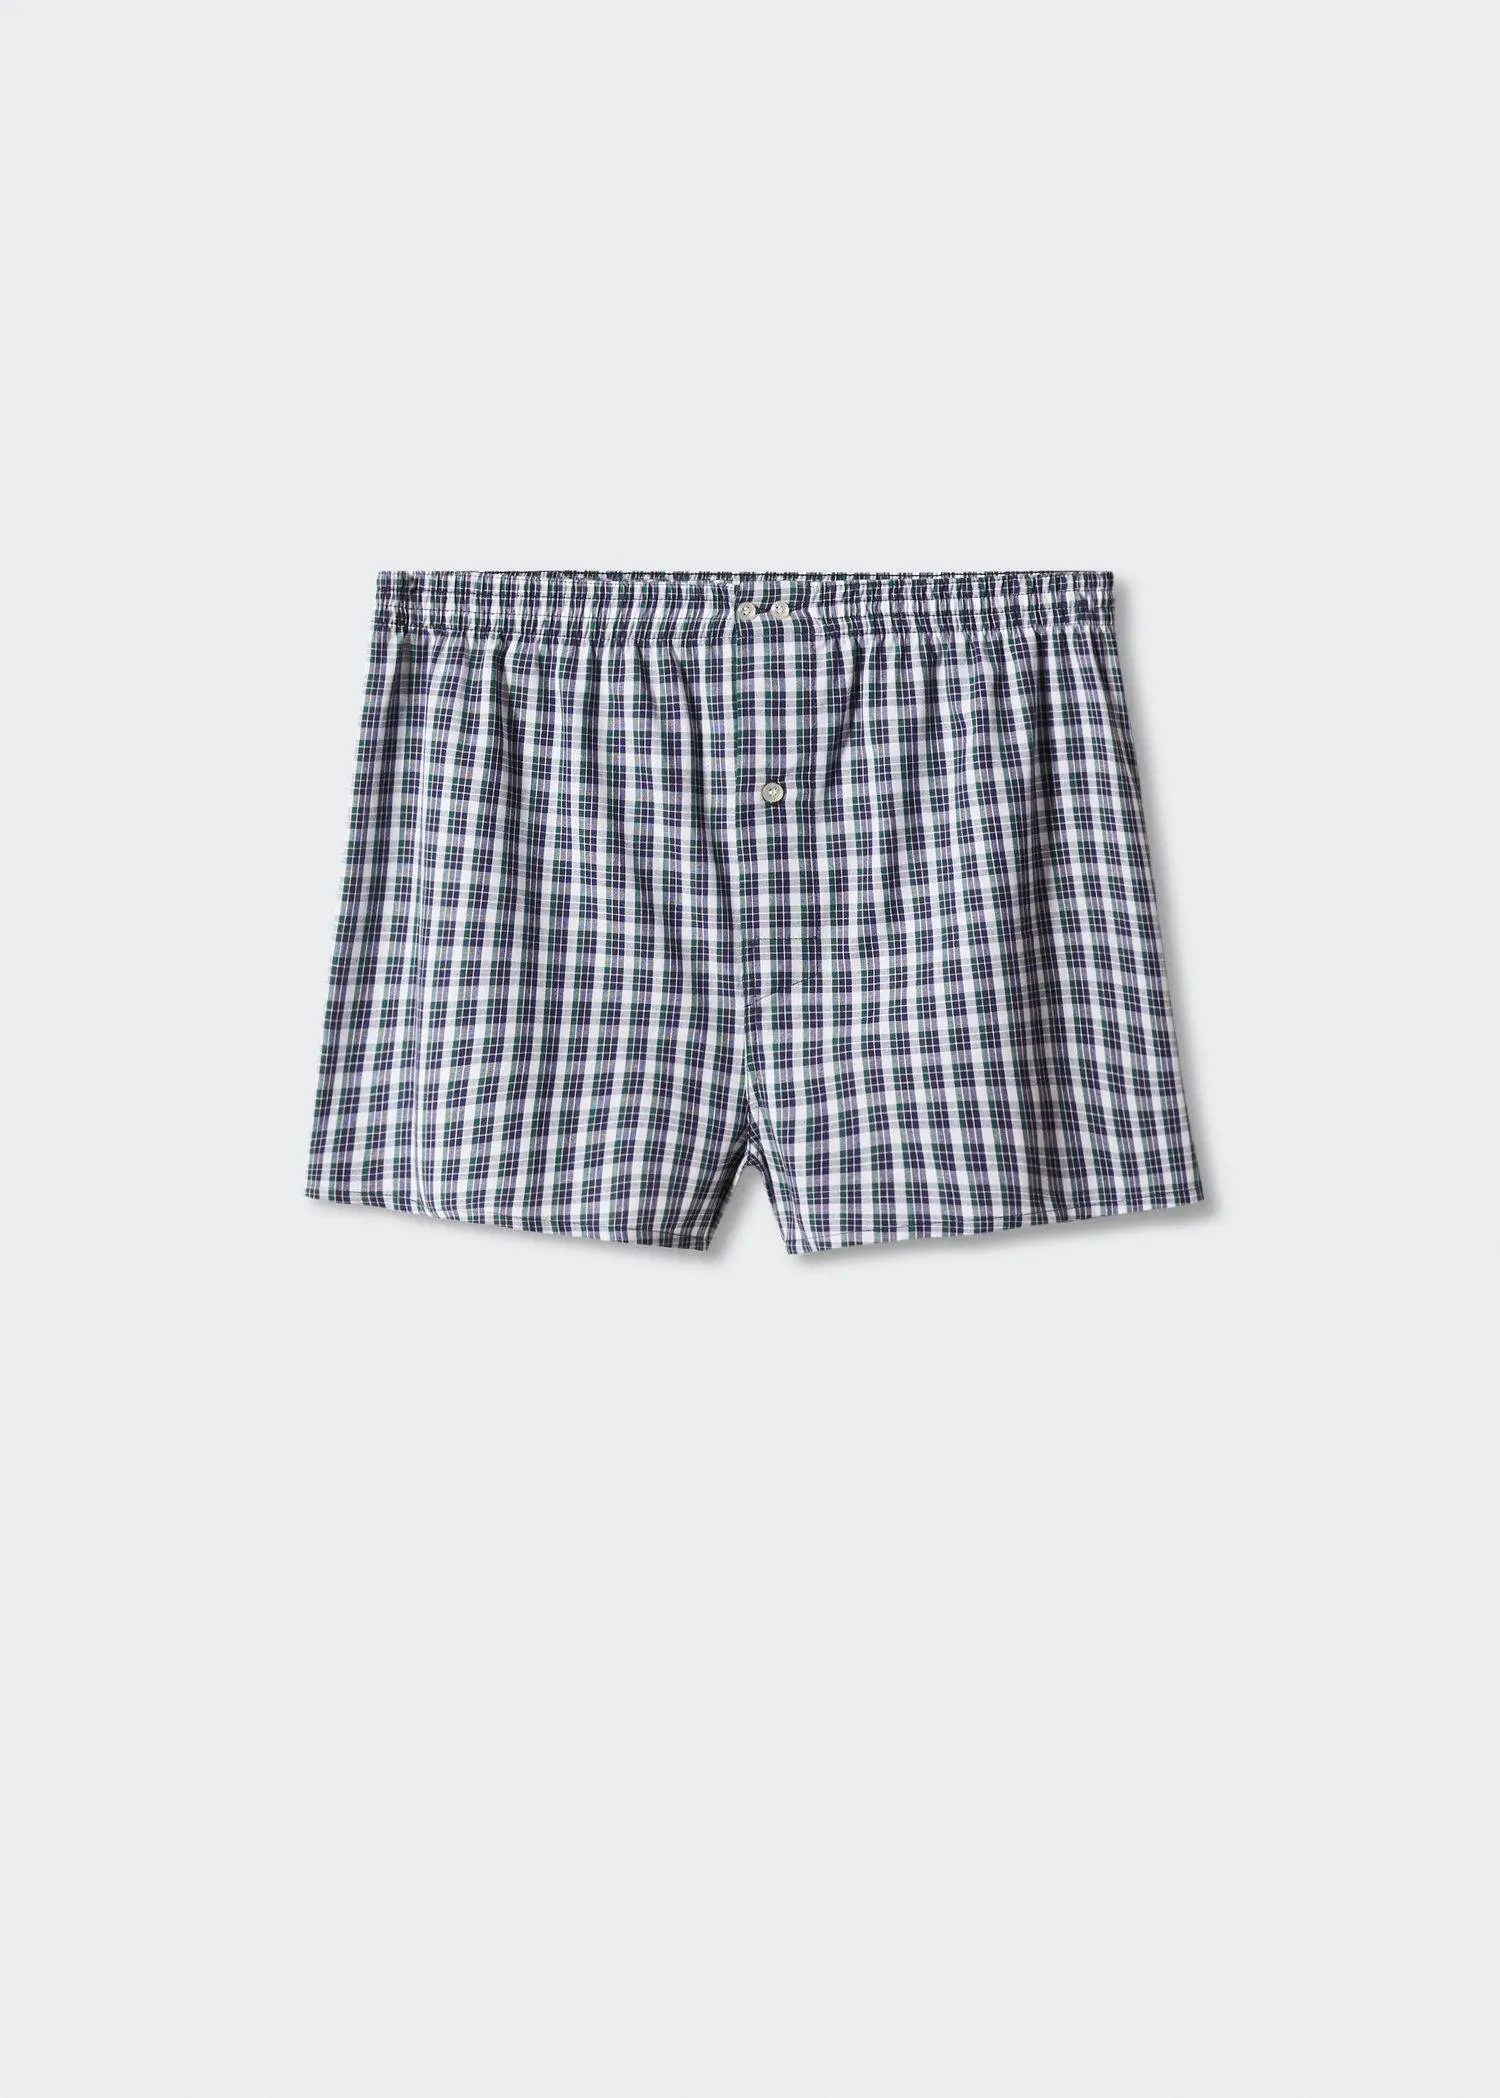 Mango Gingham check cotton briefs. a pair of boxers with a blue and white checkered pattern. 